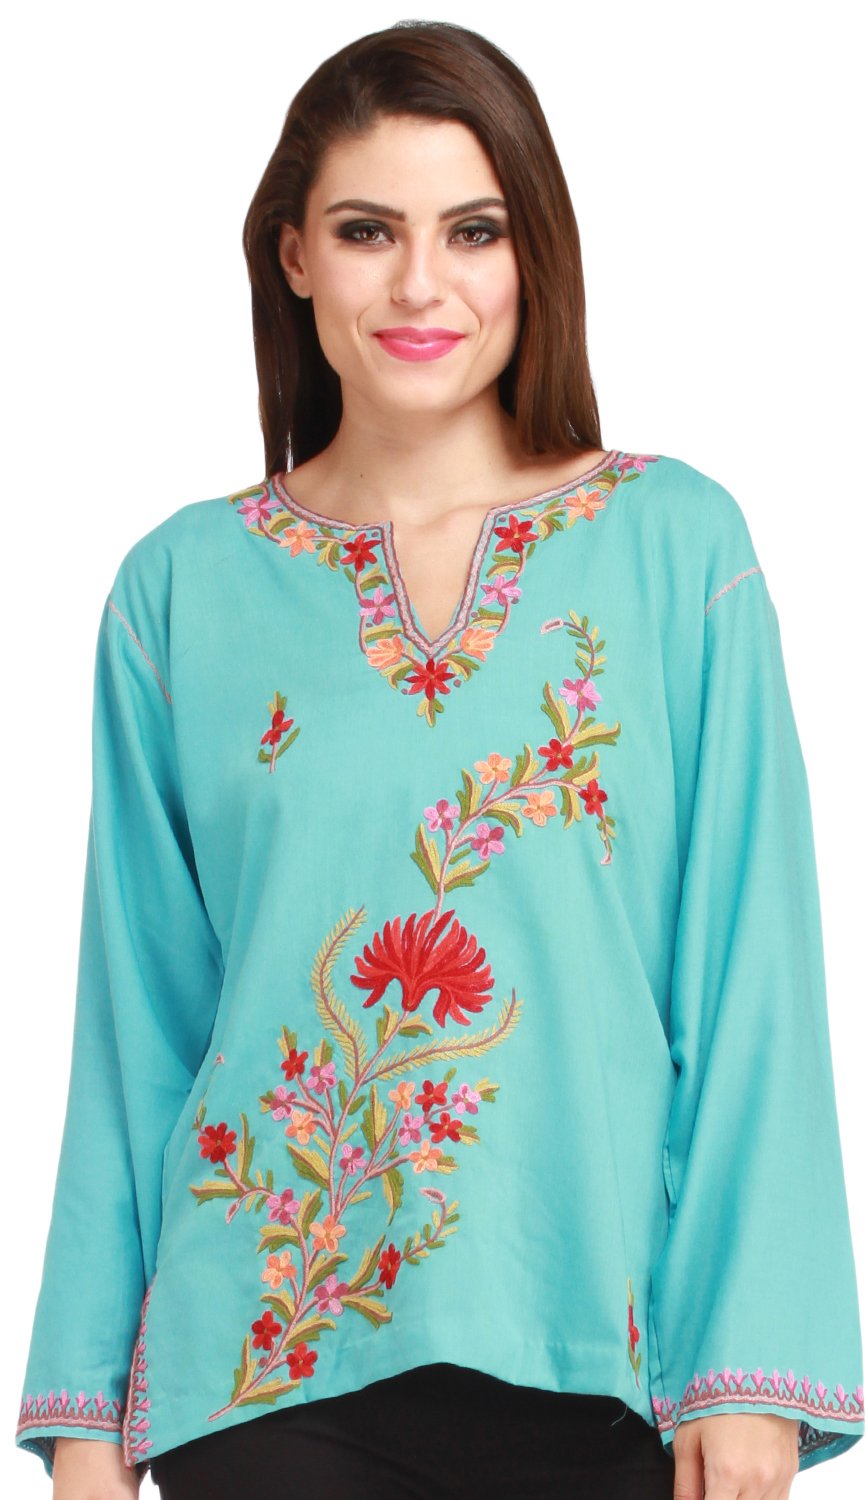 Simple Neck Embroidery Design For Kurtis